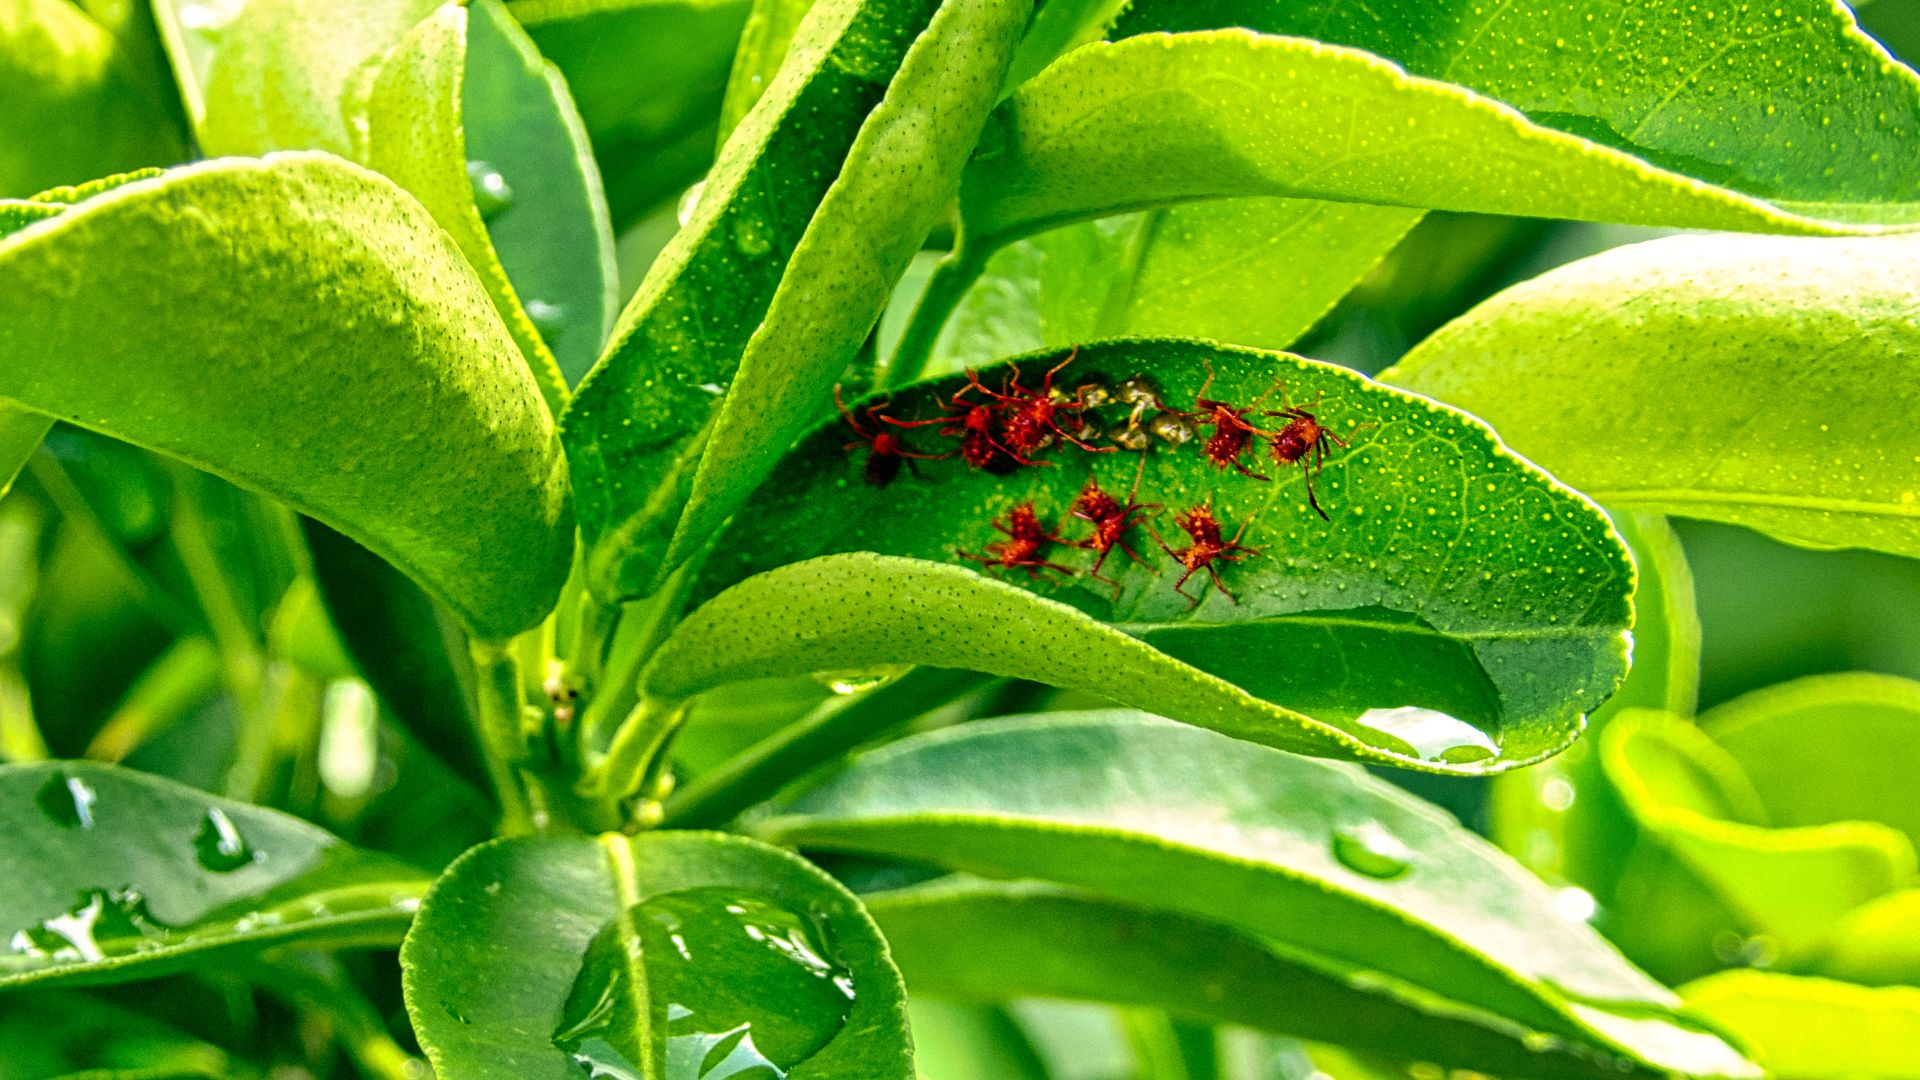 An image of box elder nymphs recently hatched on a green leaf.